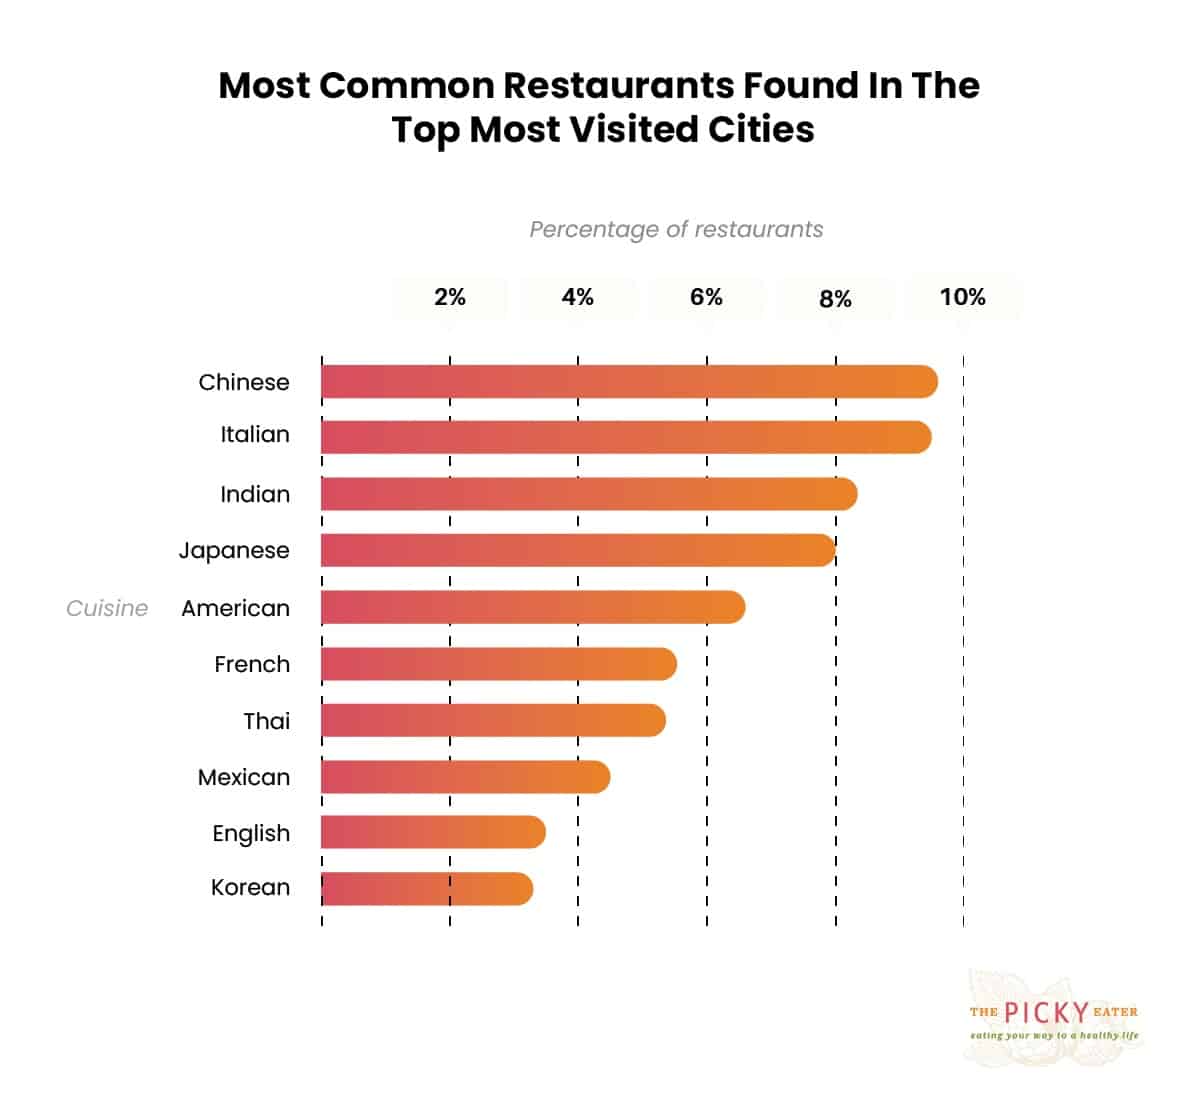 Chart showing the most common restaurants in the top most visited cities.